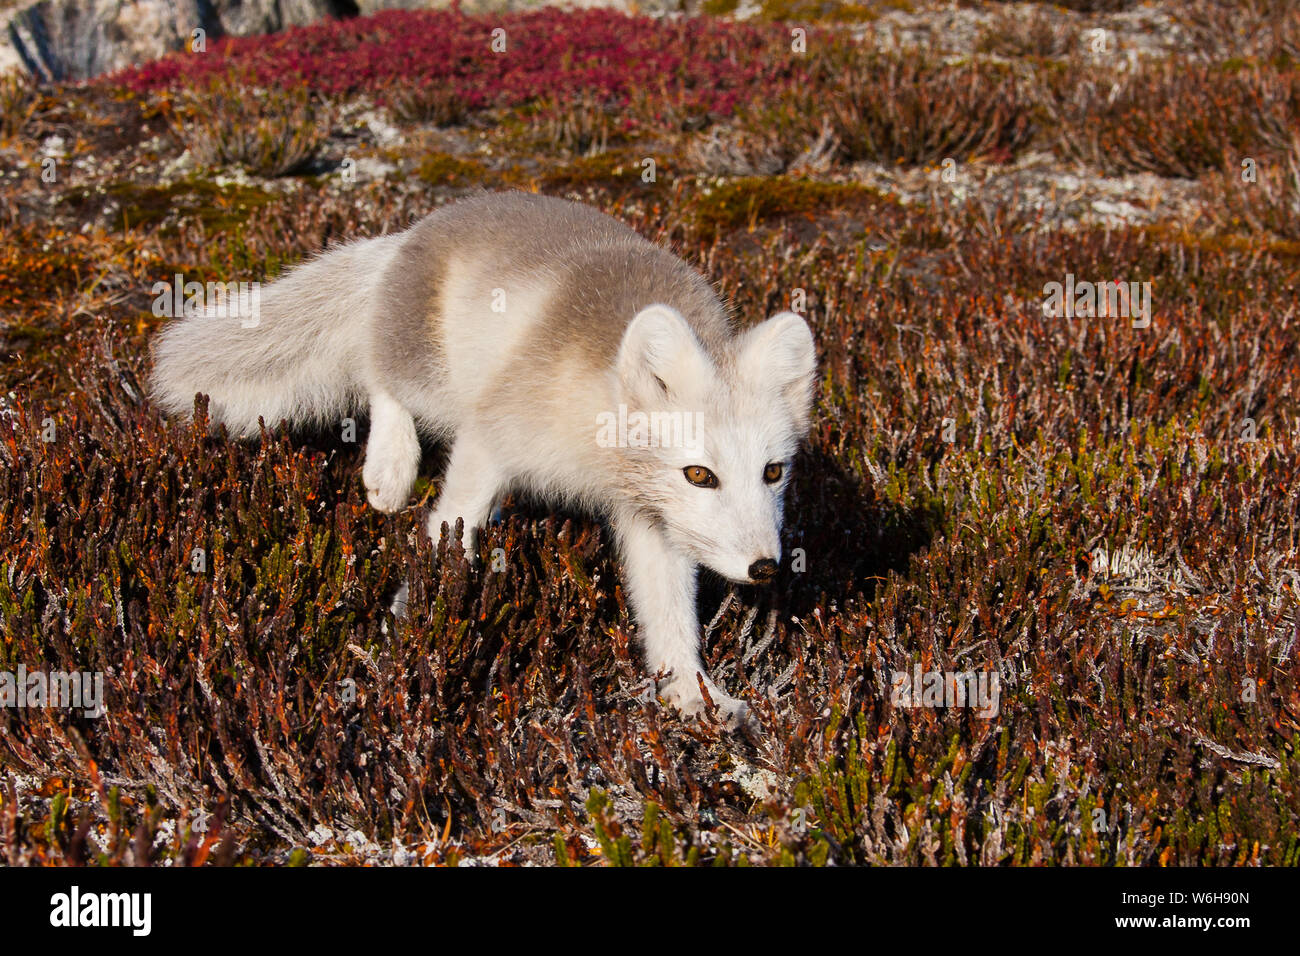 Scientific name: Alopex lagopus  Location: Hekla Havn, Greenland  Description: Whilst watching two ptarmigans, I was alerted to a presence high on the rocky hillside above me. I looked straight into the eyes of a juvenile arctic fox.  Our eyes locked, as he continued his slow descent down the hillside, progressing ever closer to me. Without a tripod, and very aware that I had this one chance to adjust my position to get a decent shot, I threw myself over an adjacent rock, using it to steady my arms. Here I waited....My patience paid off, and the fox ambled slowly towards me, never faltering. W Stock Photo